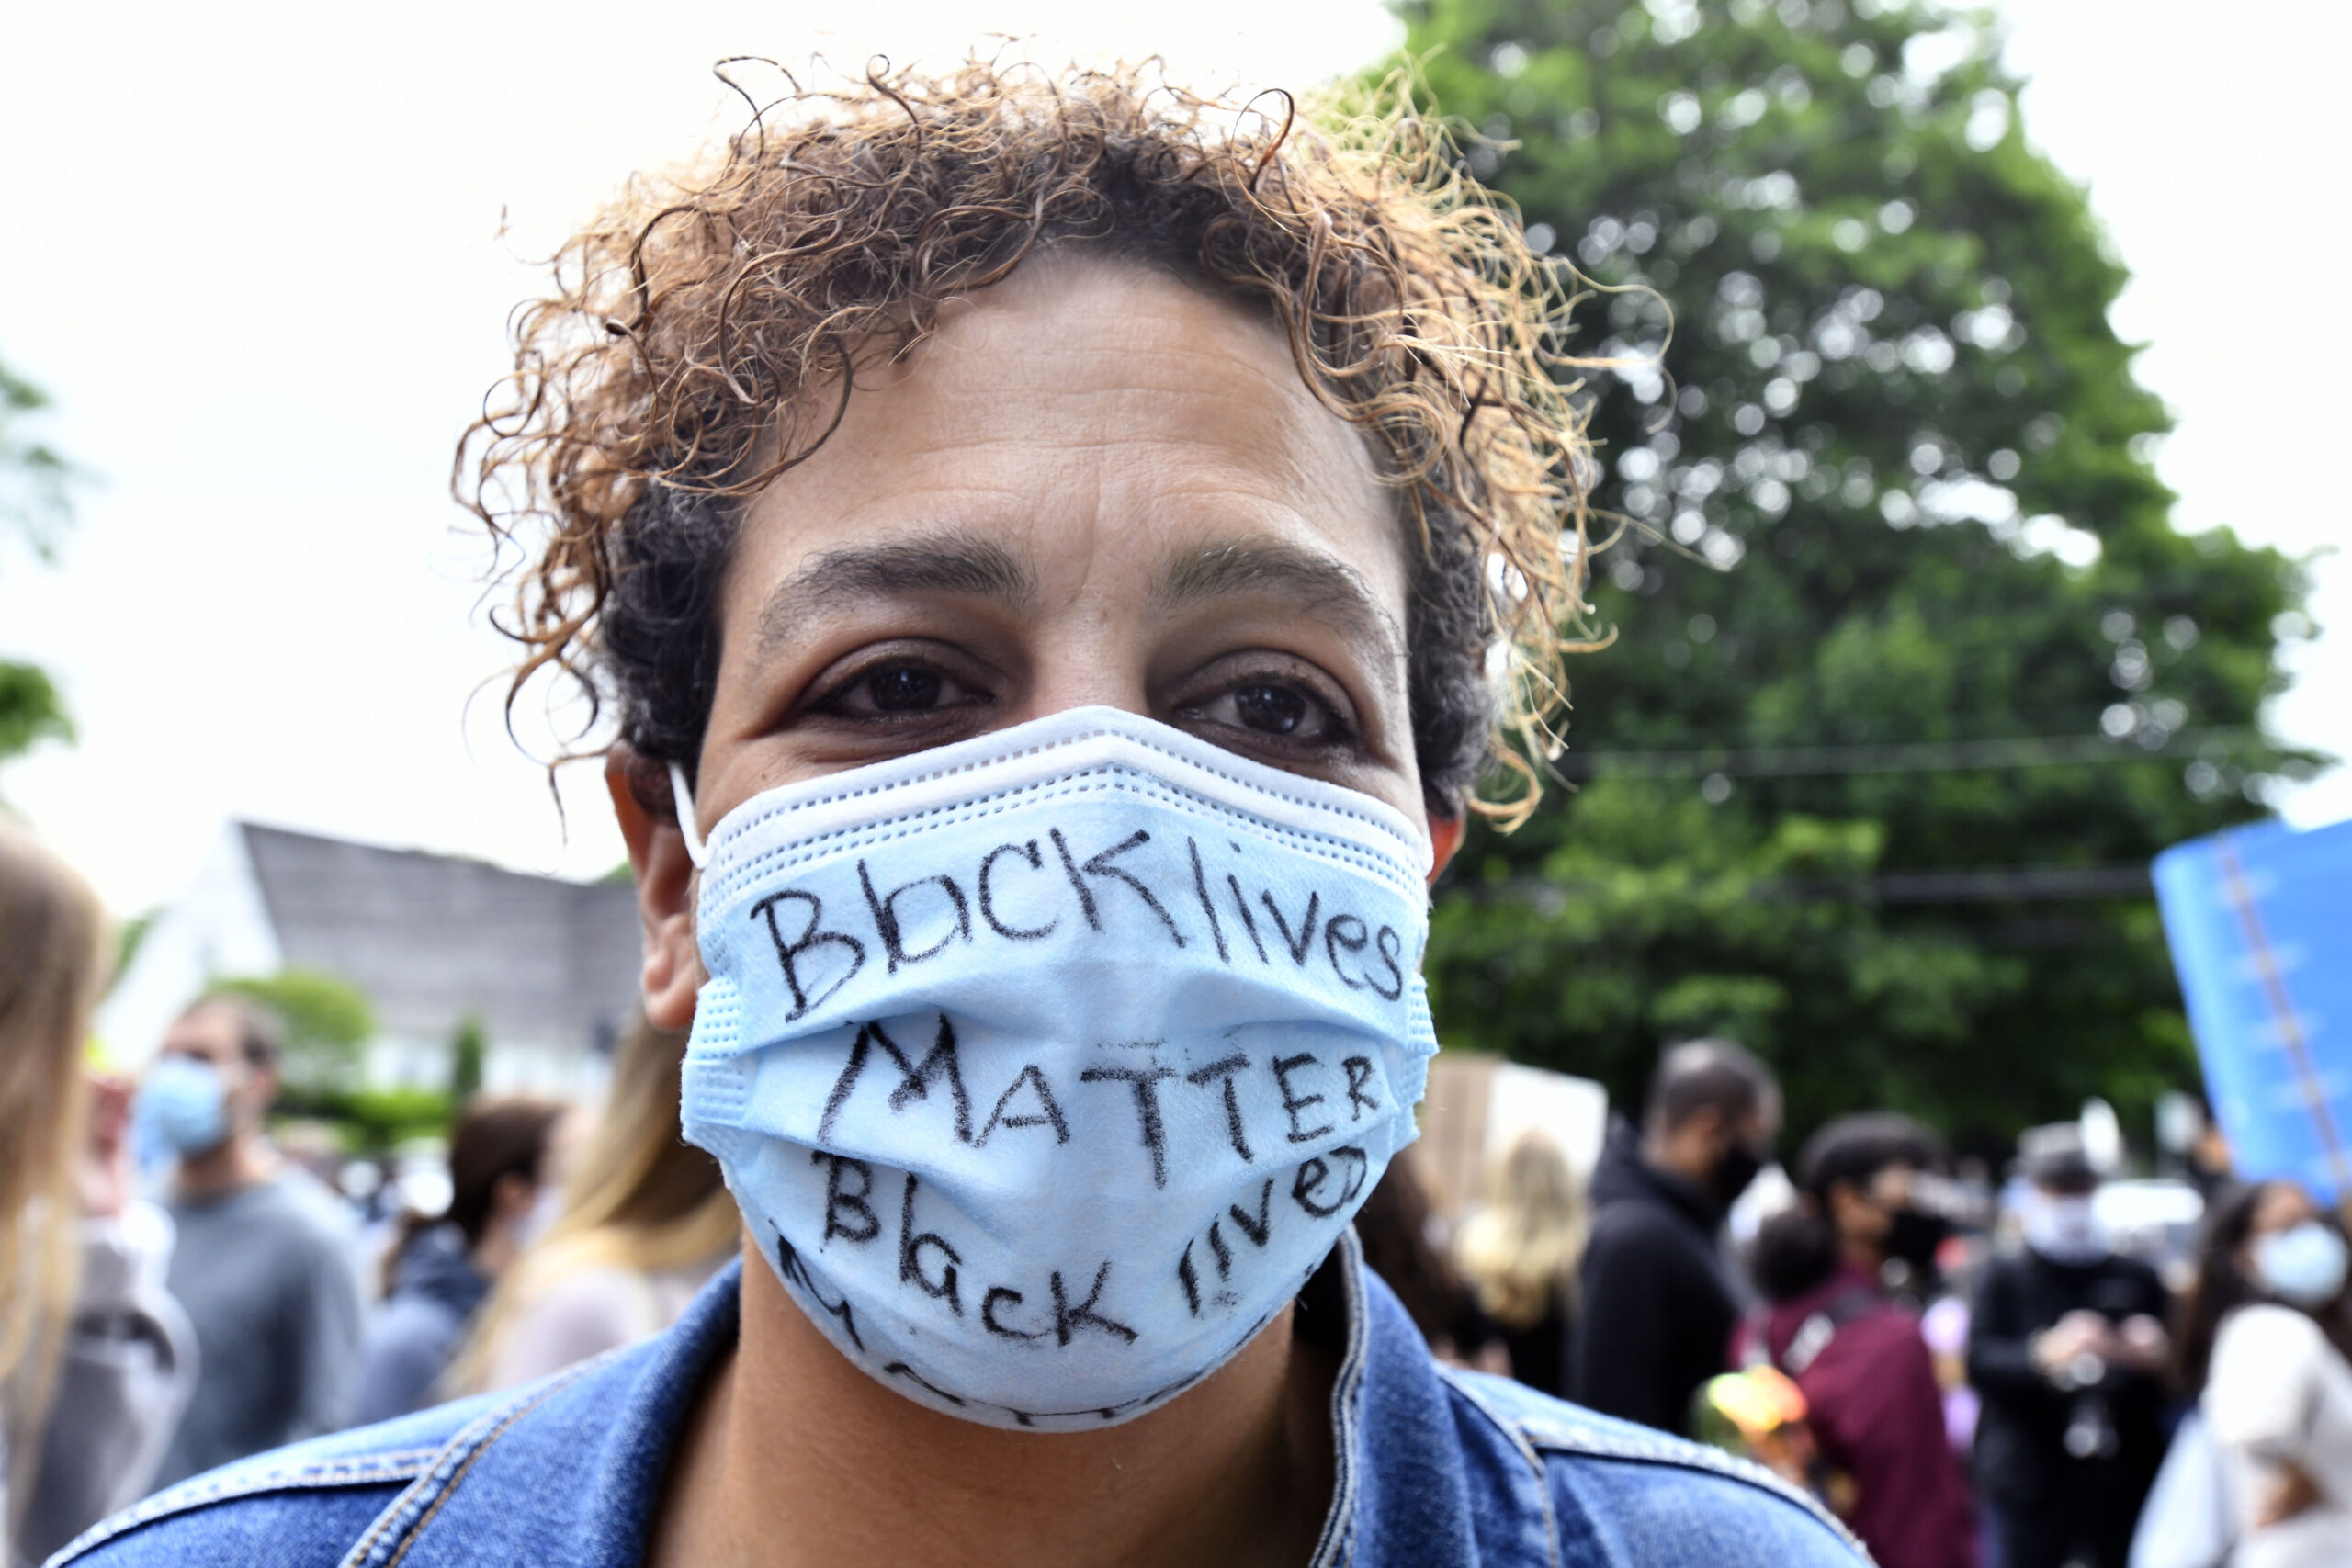 Masks became a common sight in everyday life. Hundreds of people attended the Black Lives Matter protest in Bridgehampton in June of 2020, masked.  DANA SHAW